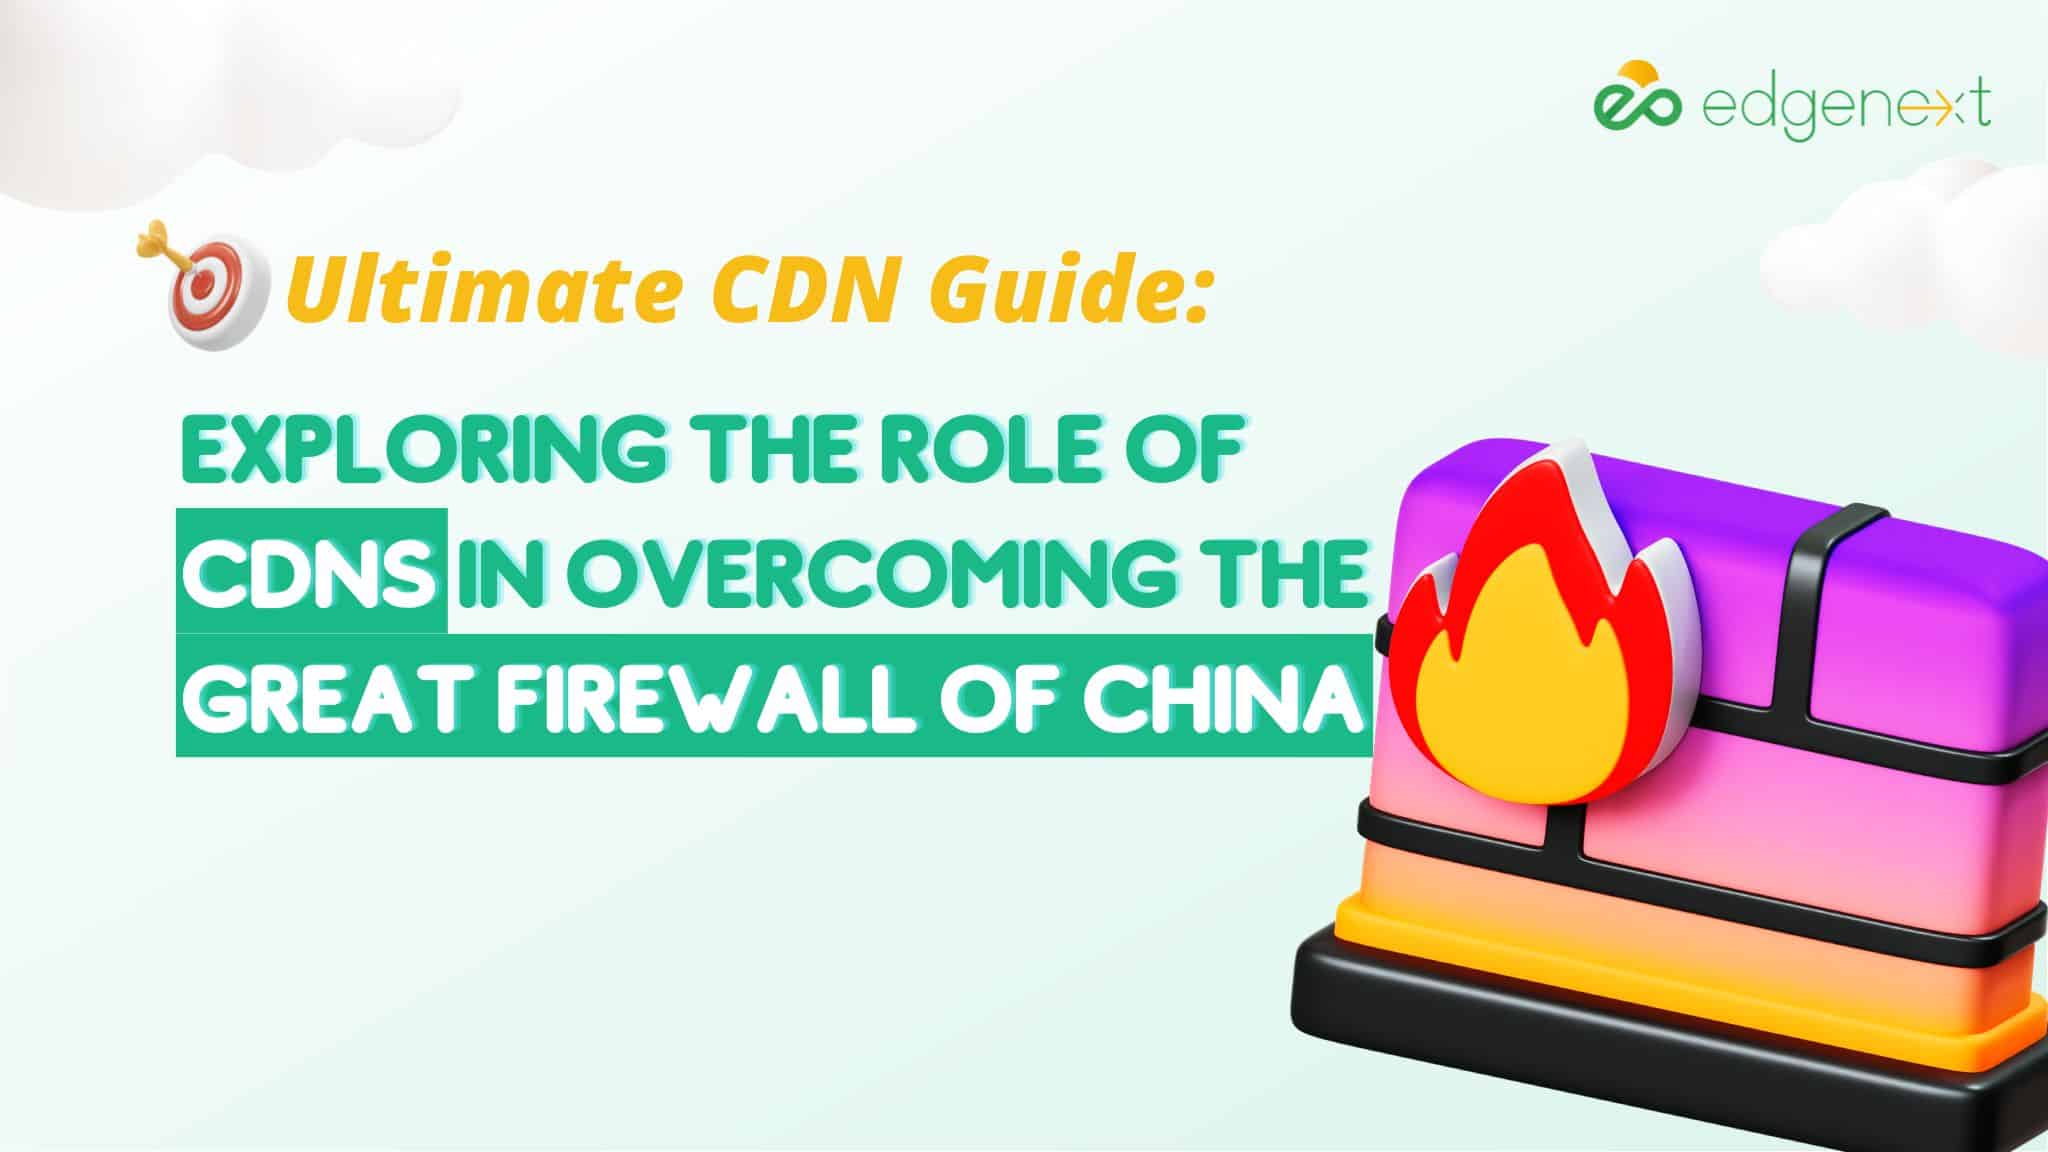 Exploring the Role of CDNs in Overcoming the Great Firewall of China